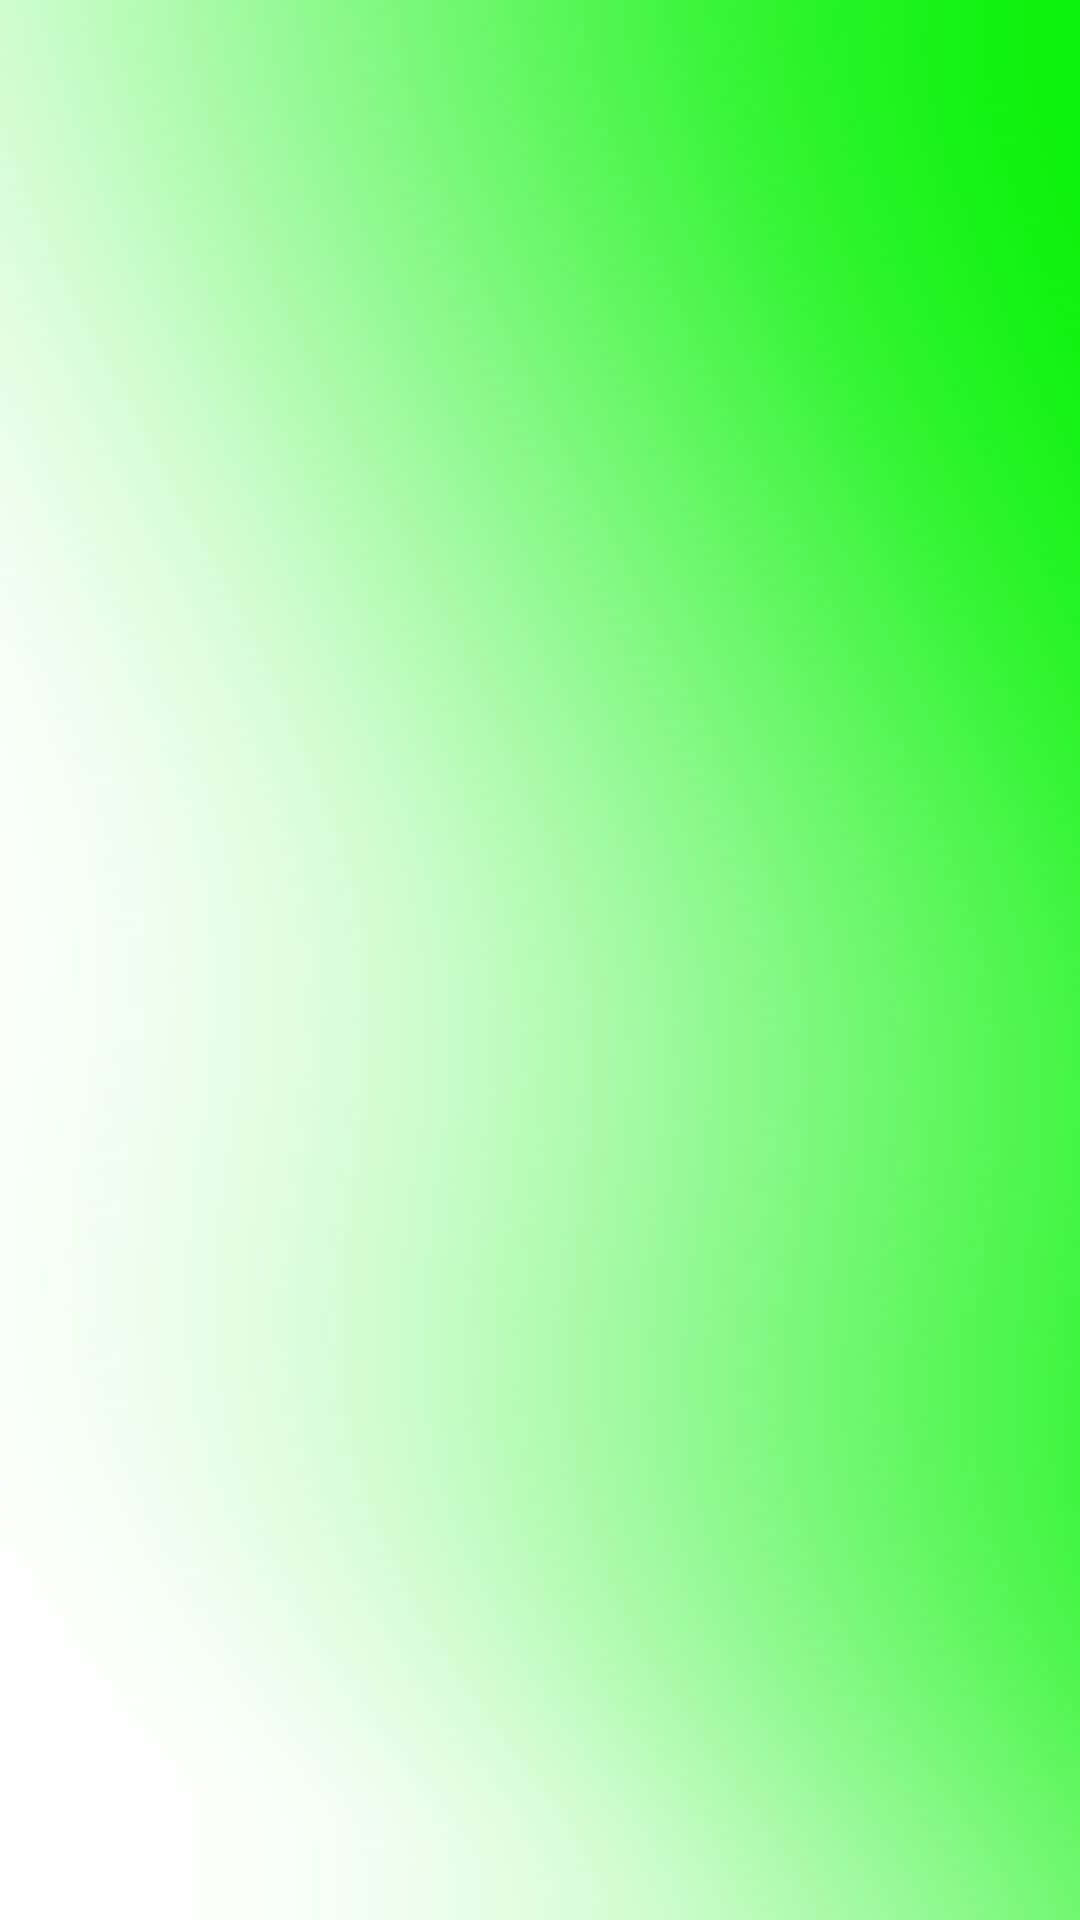 Green And White Gradient Background